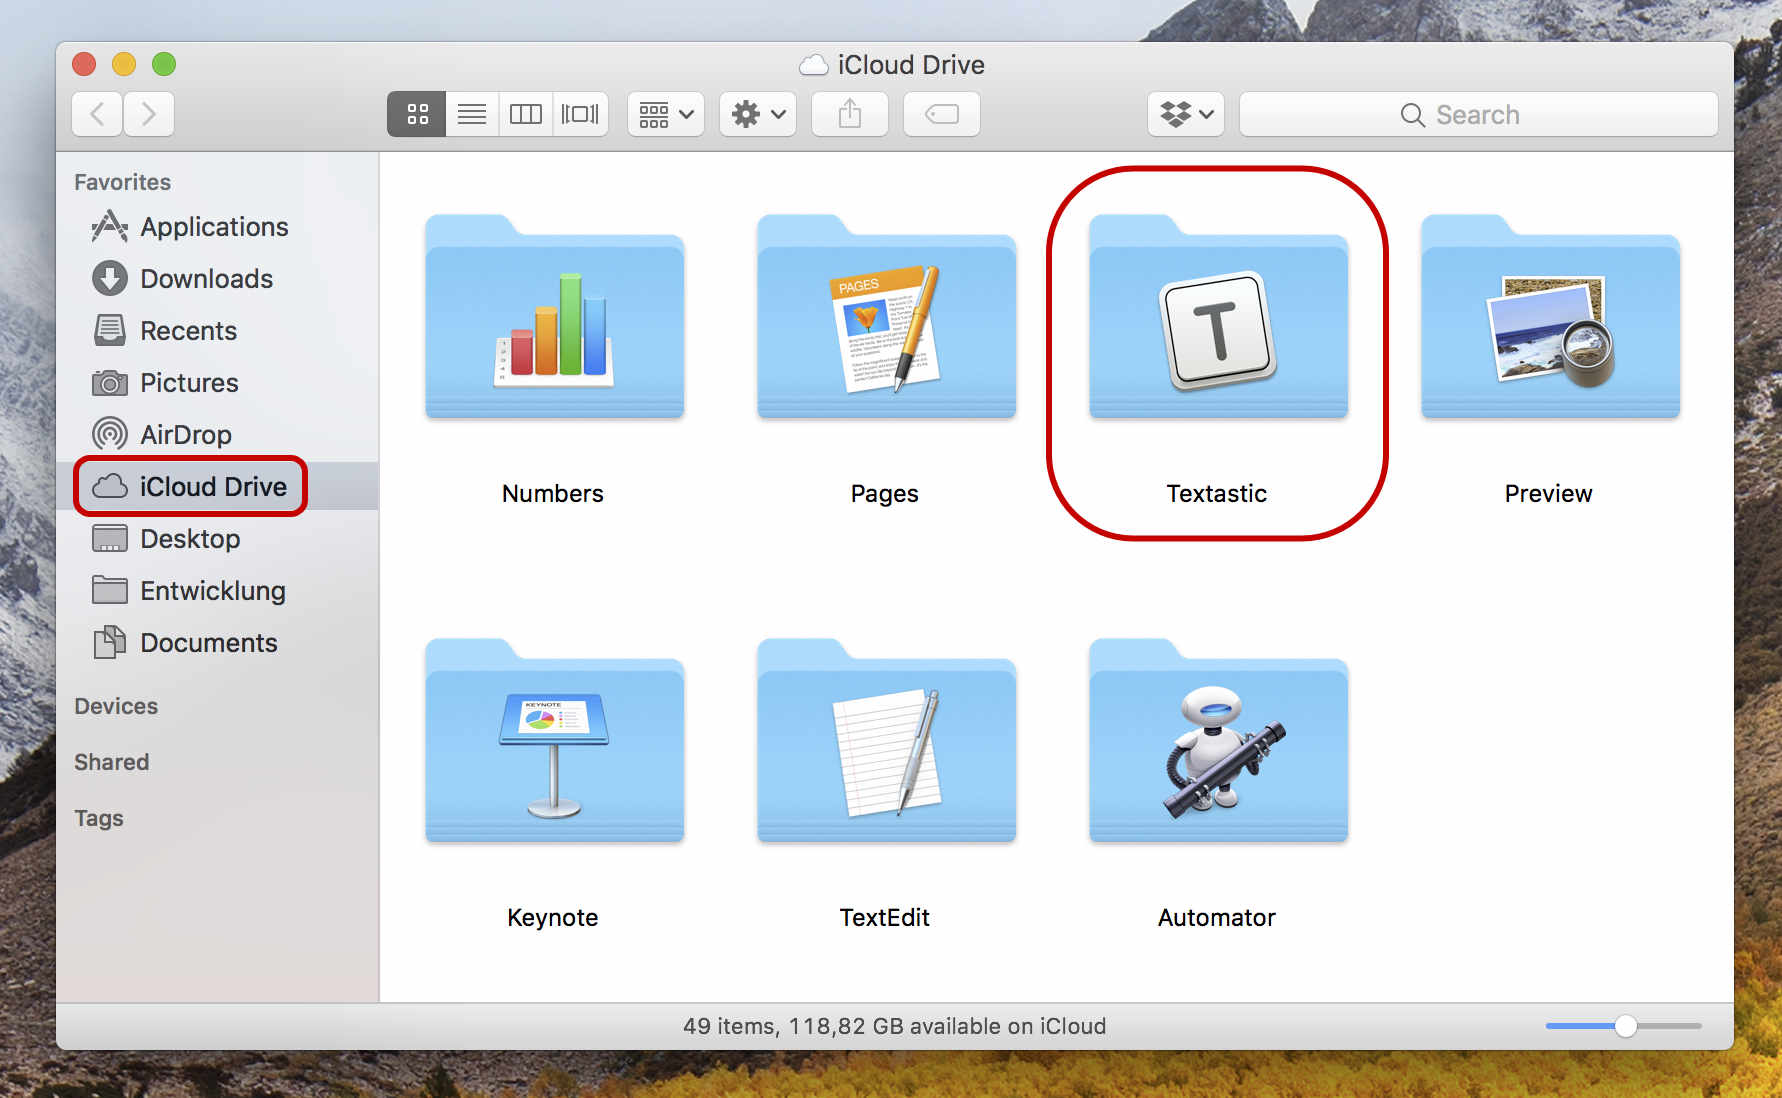 Textastic's iCloud Drive container in macOS Finder